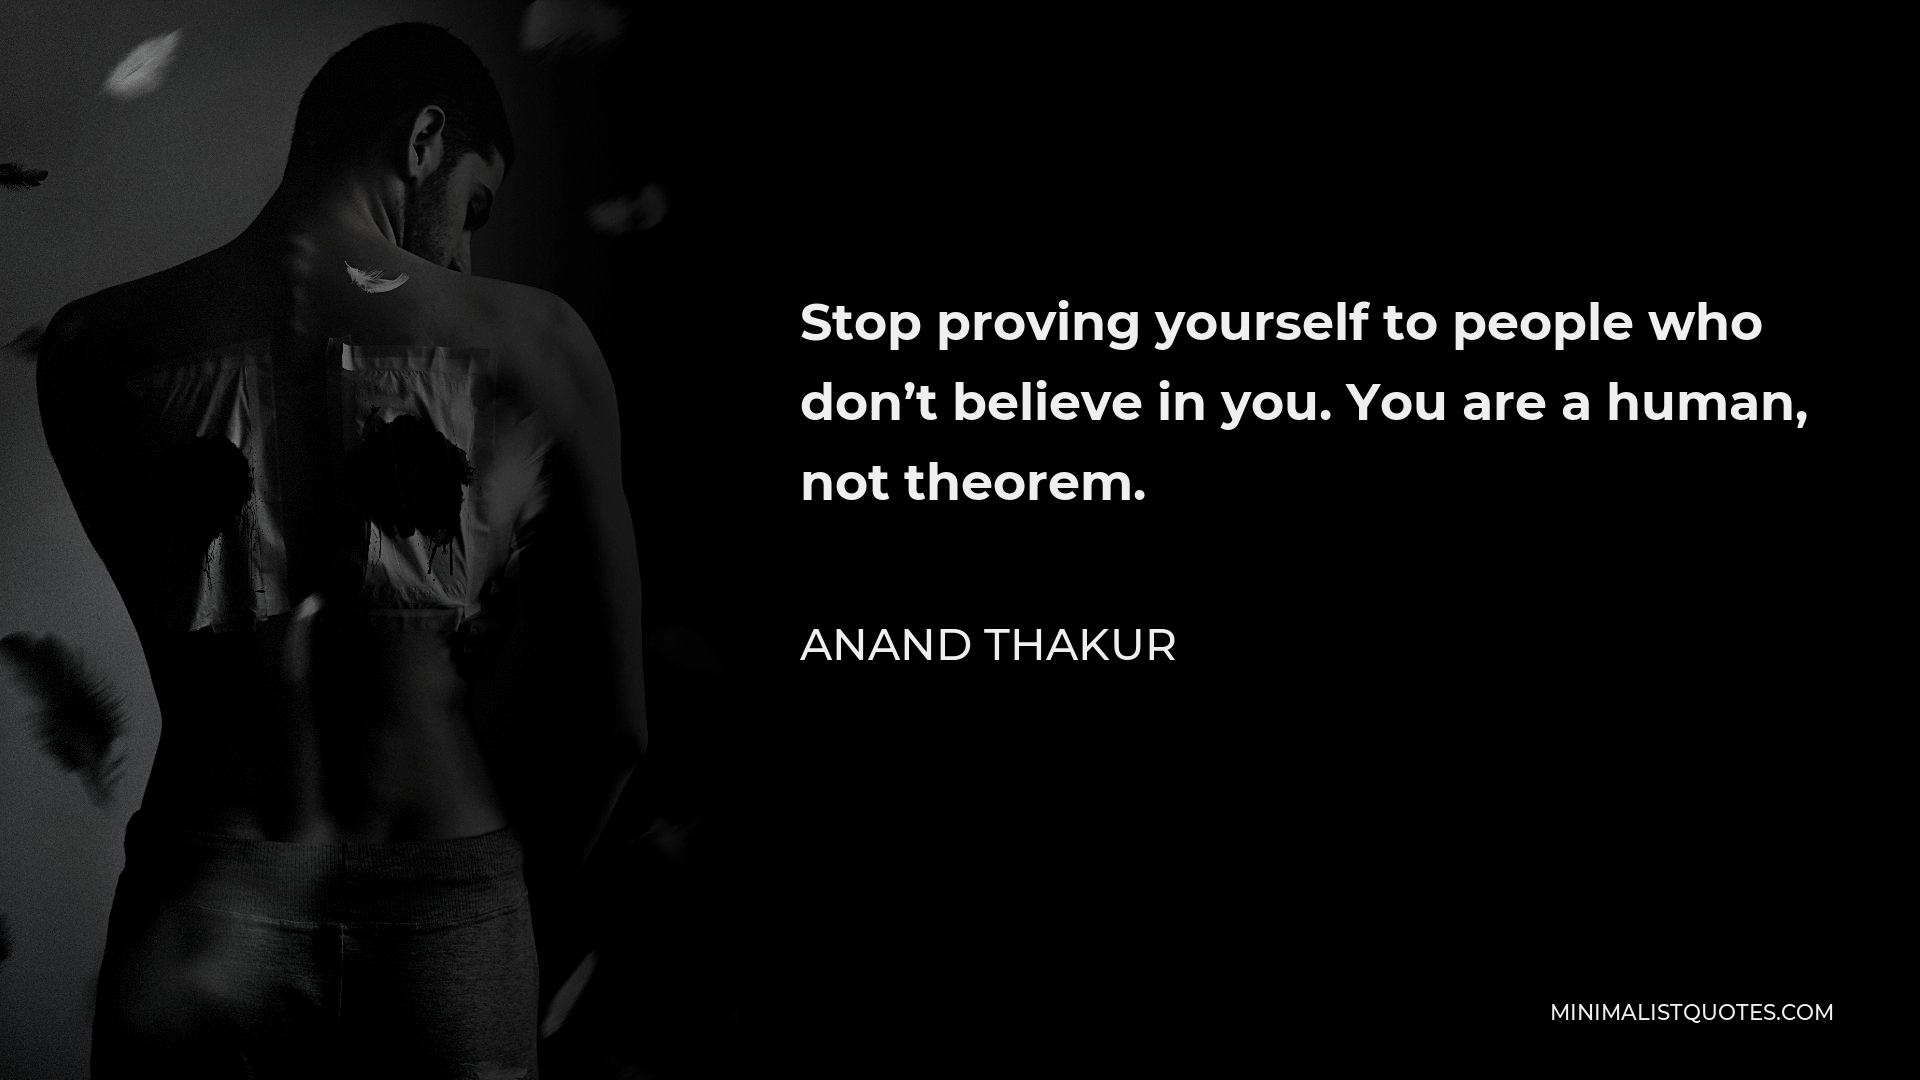 Anand Thakur Quote - Stop proving yourself to people who don’t believe in you. You are a human, not theorem.